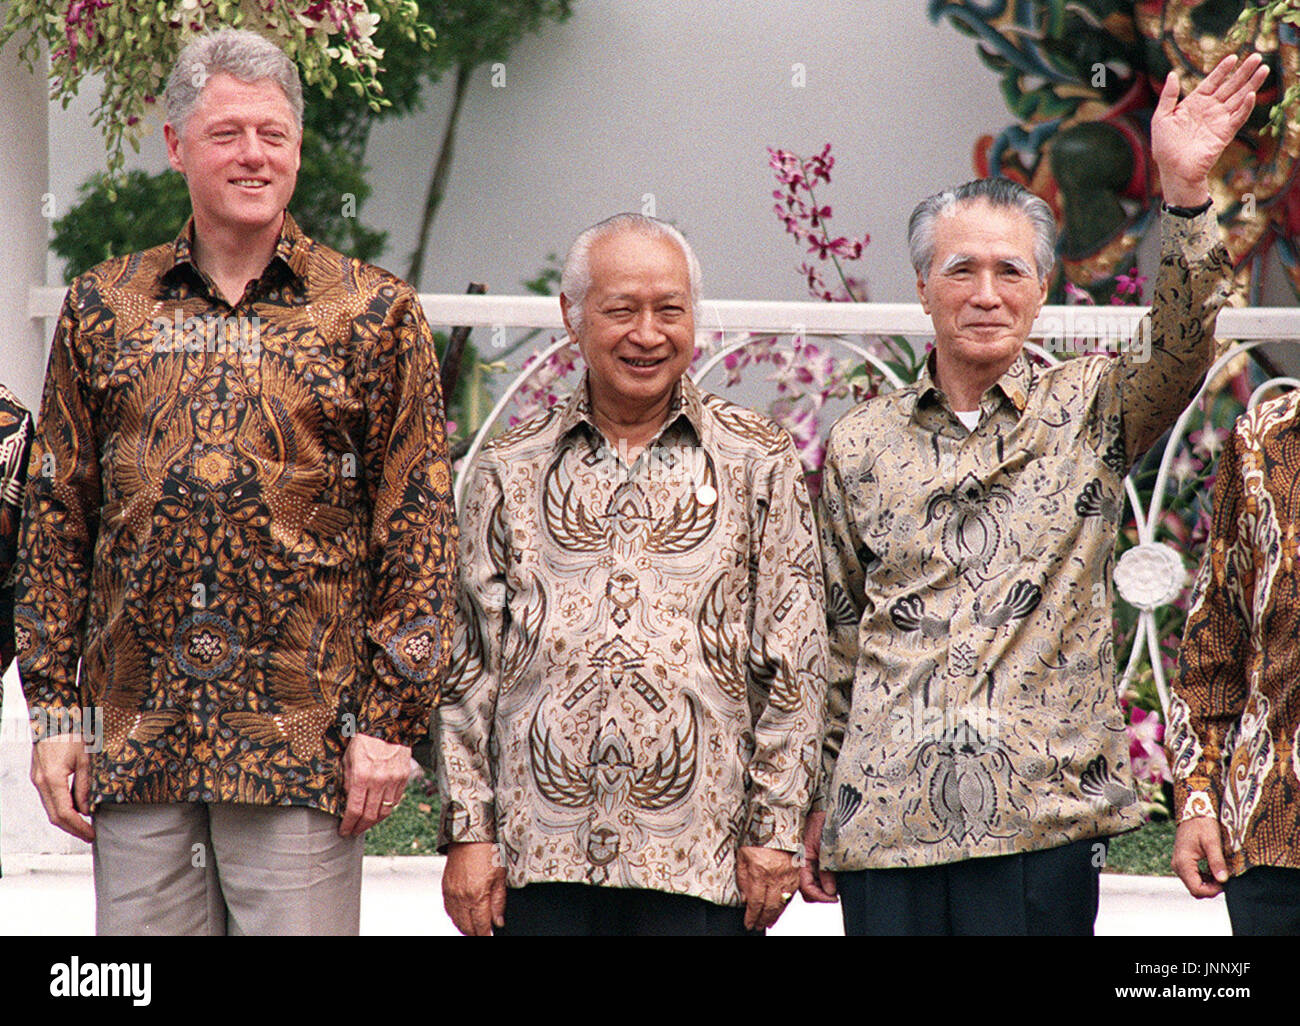 JAKARTA, Indonesia - Indonesian President Suharto (C) poses with U.S. President Bill Clinton (L) and Japanese Prime Minister Tomiichi Murayama (R) prior to an informal APEC summit at the Bogor Palace near Jakarta in November 1994. Suharto who shaped and ruled the country for 32 years through ruthless but quiet authoritarianism, died on Jan. 27 at age 86. (Kyodo) Stock Photo